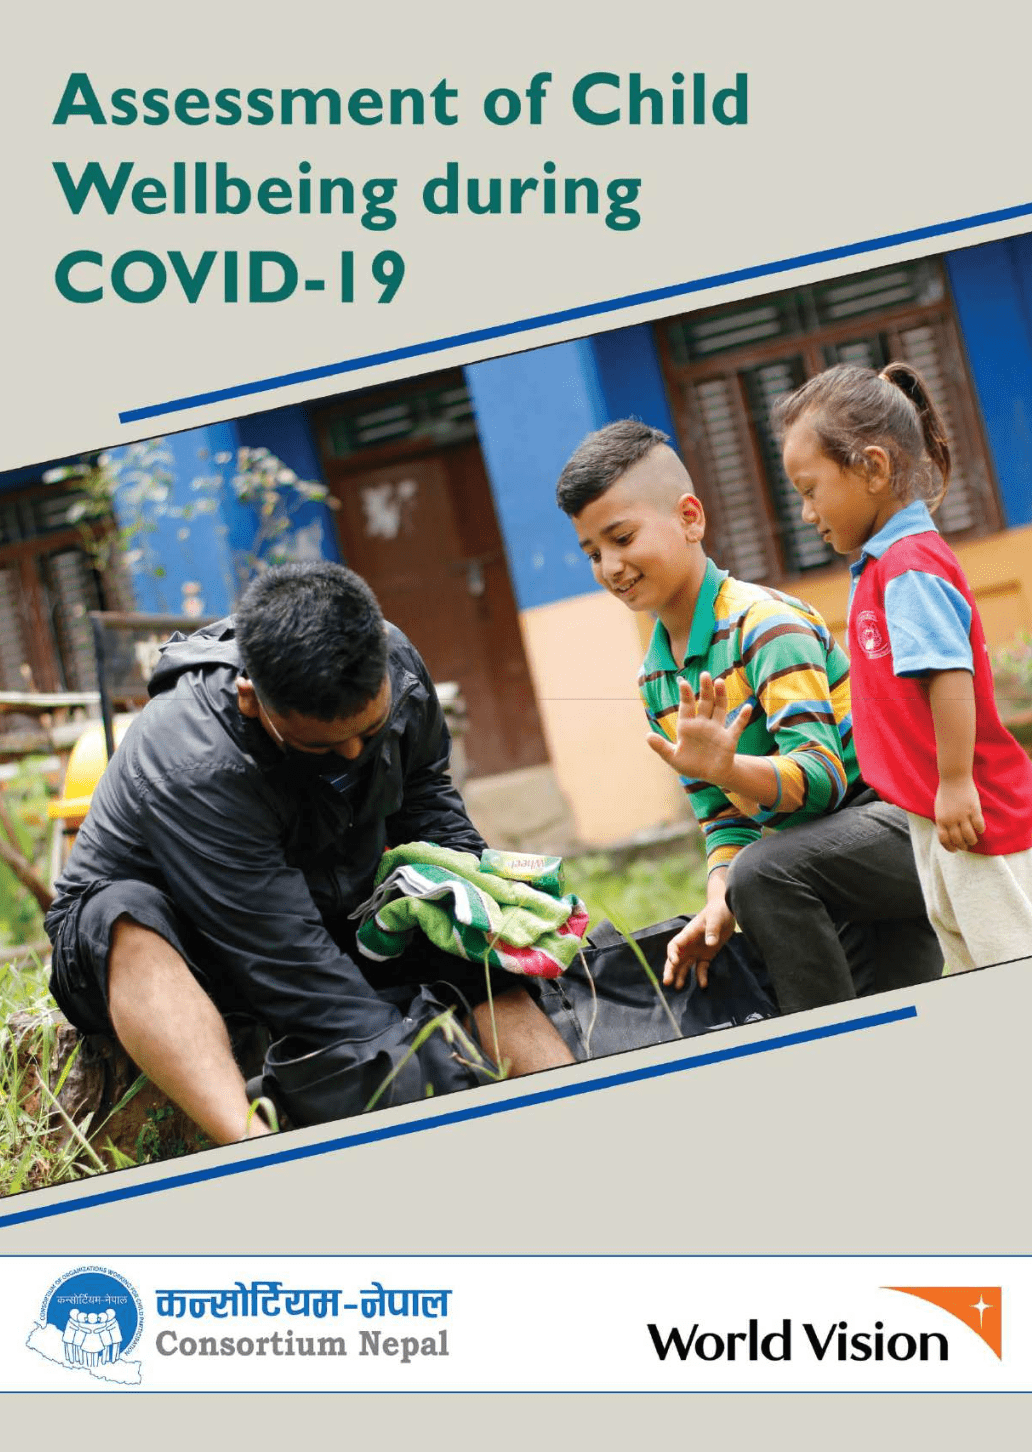 Assessment of Child Wellbeing during COVID-19